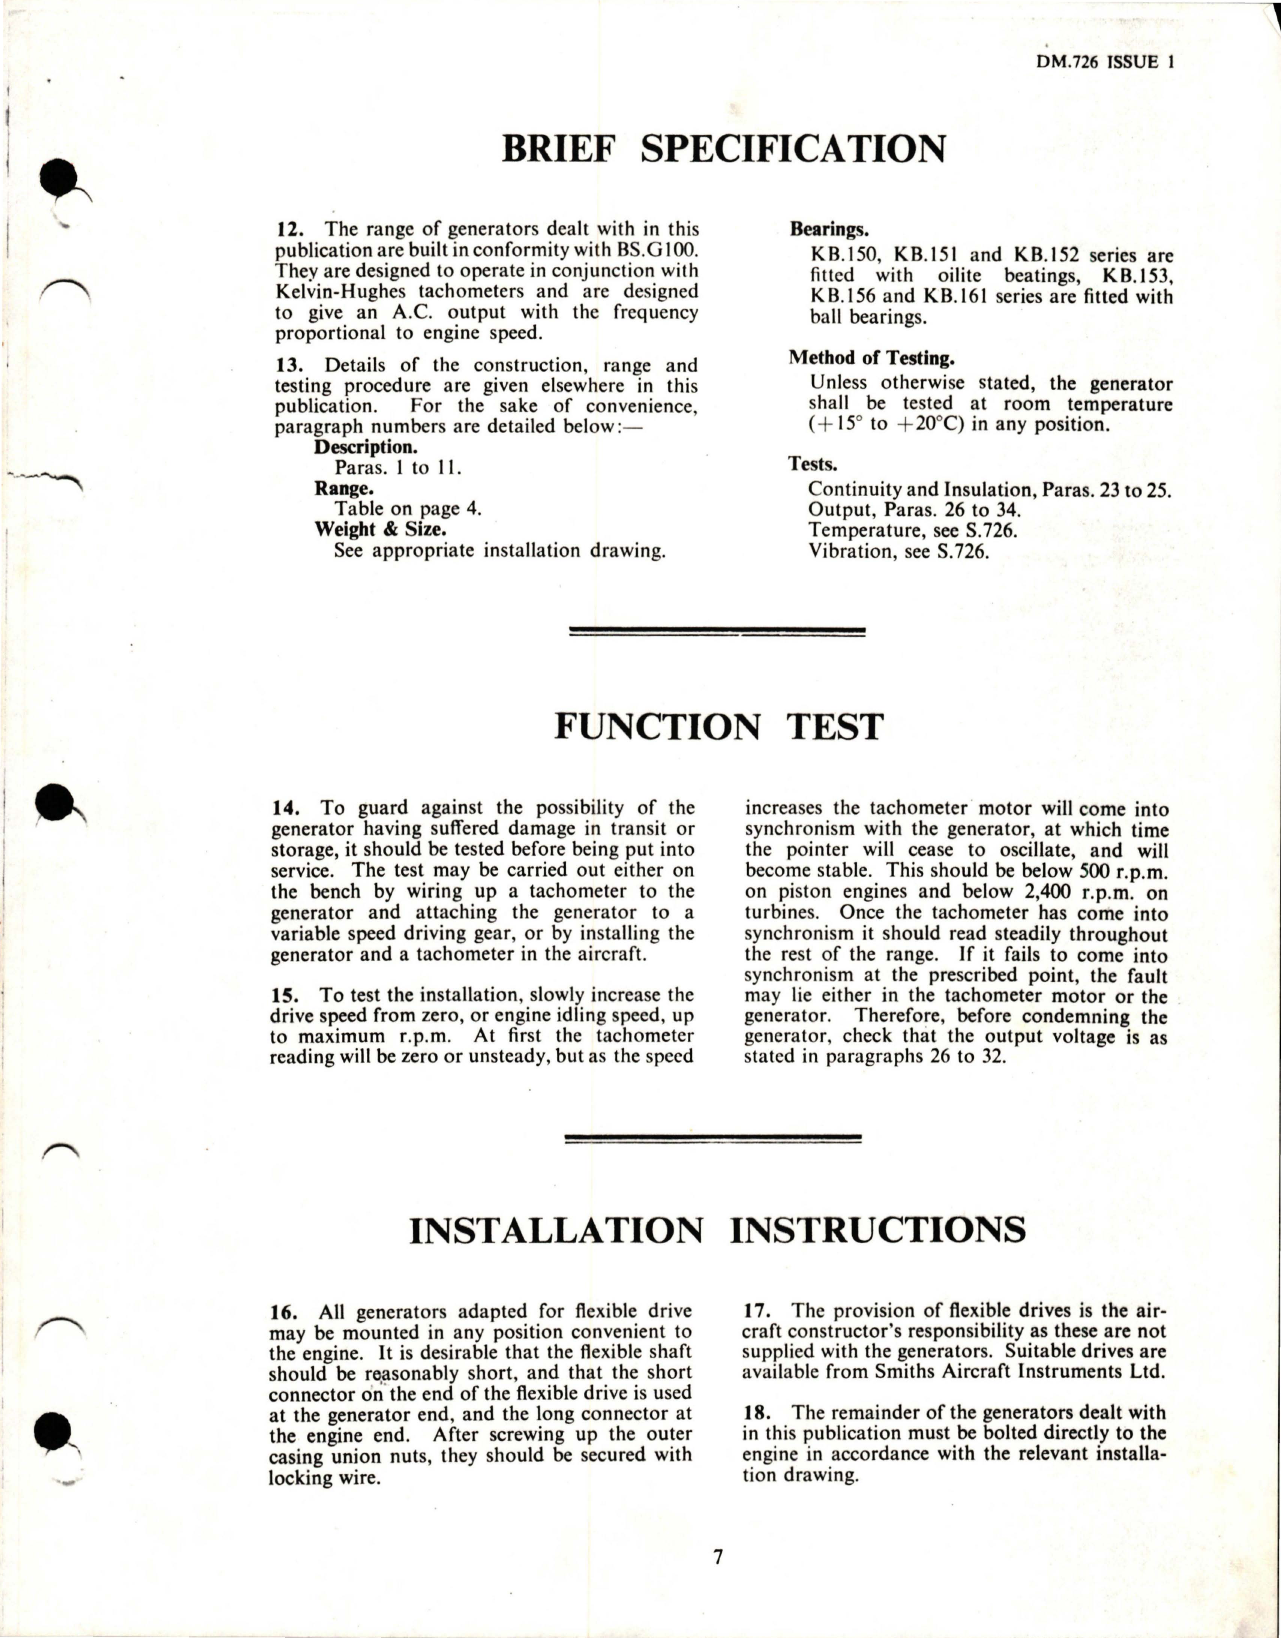 Sample page 7 from AirCorps Library document: Maintenance Instructions for Electrical Engine Speed Generators - Issue No.1